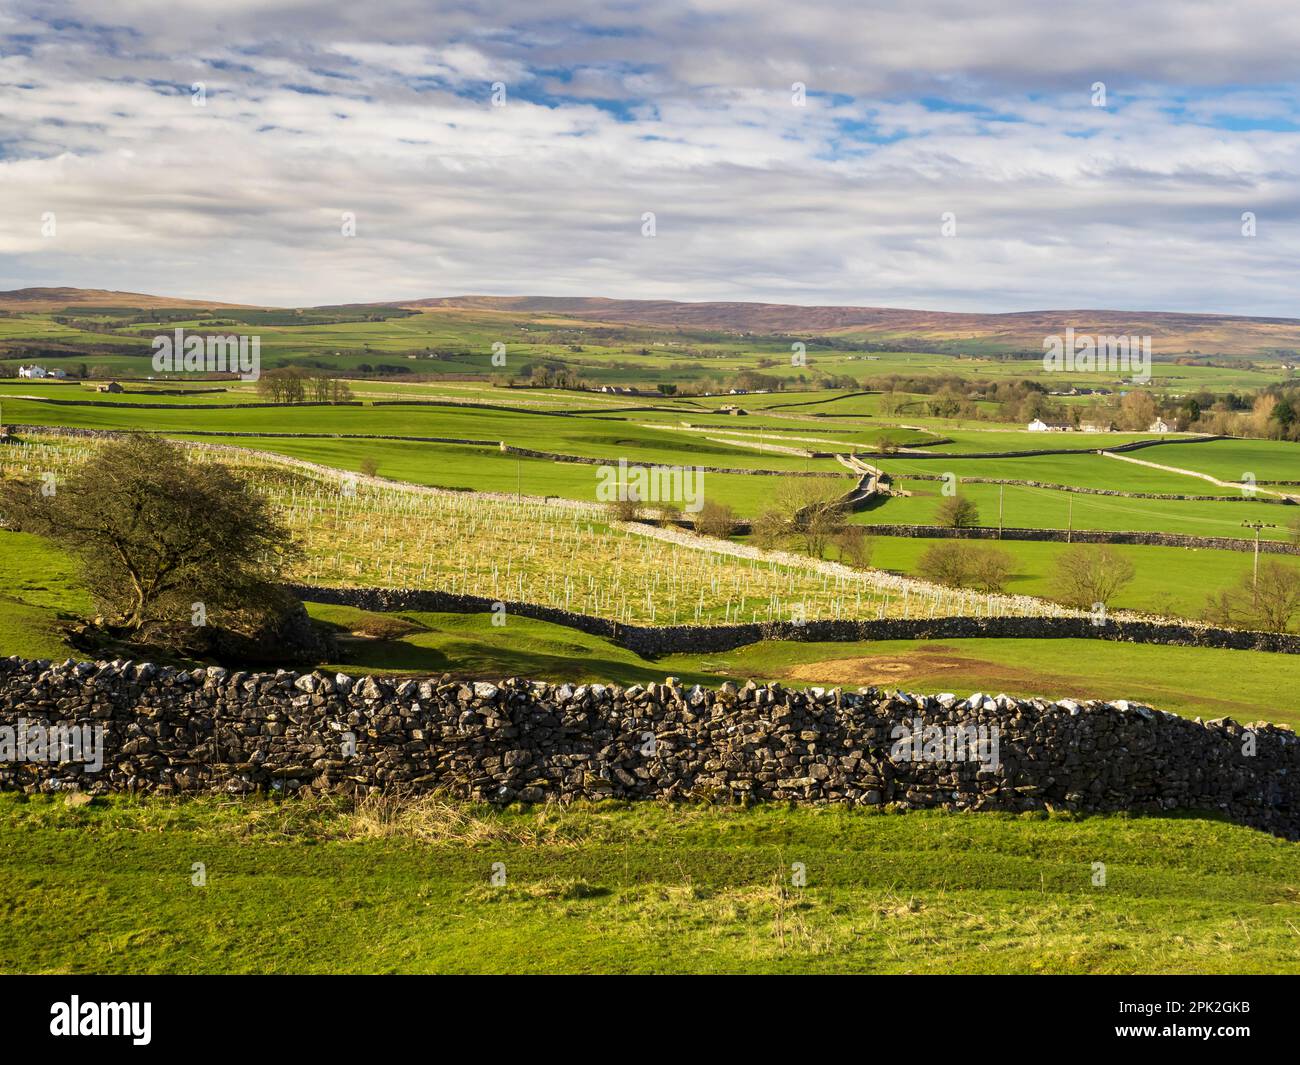 Tree planting in Austwick, Yorkshire Dales, UK, looking towards the Bowland fells. Stock Photo